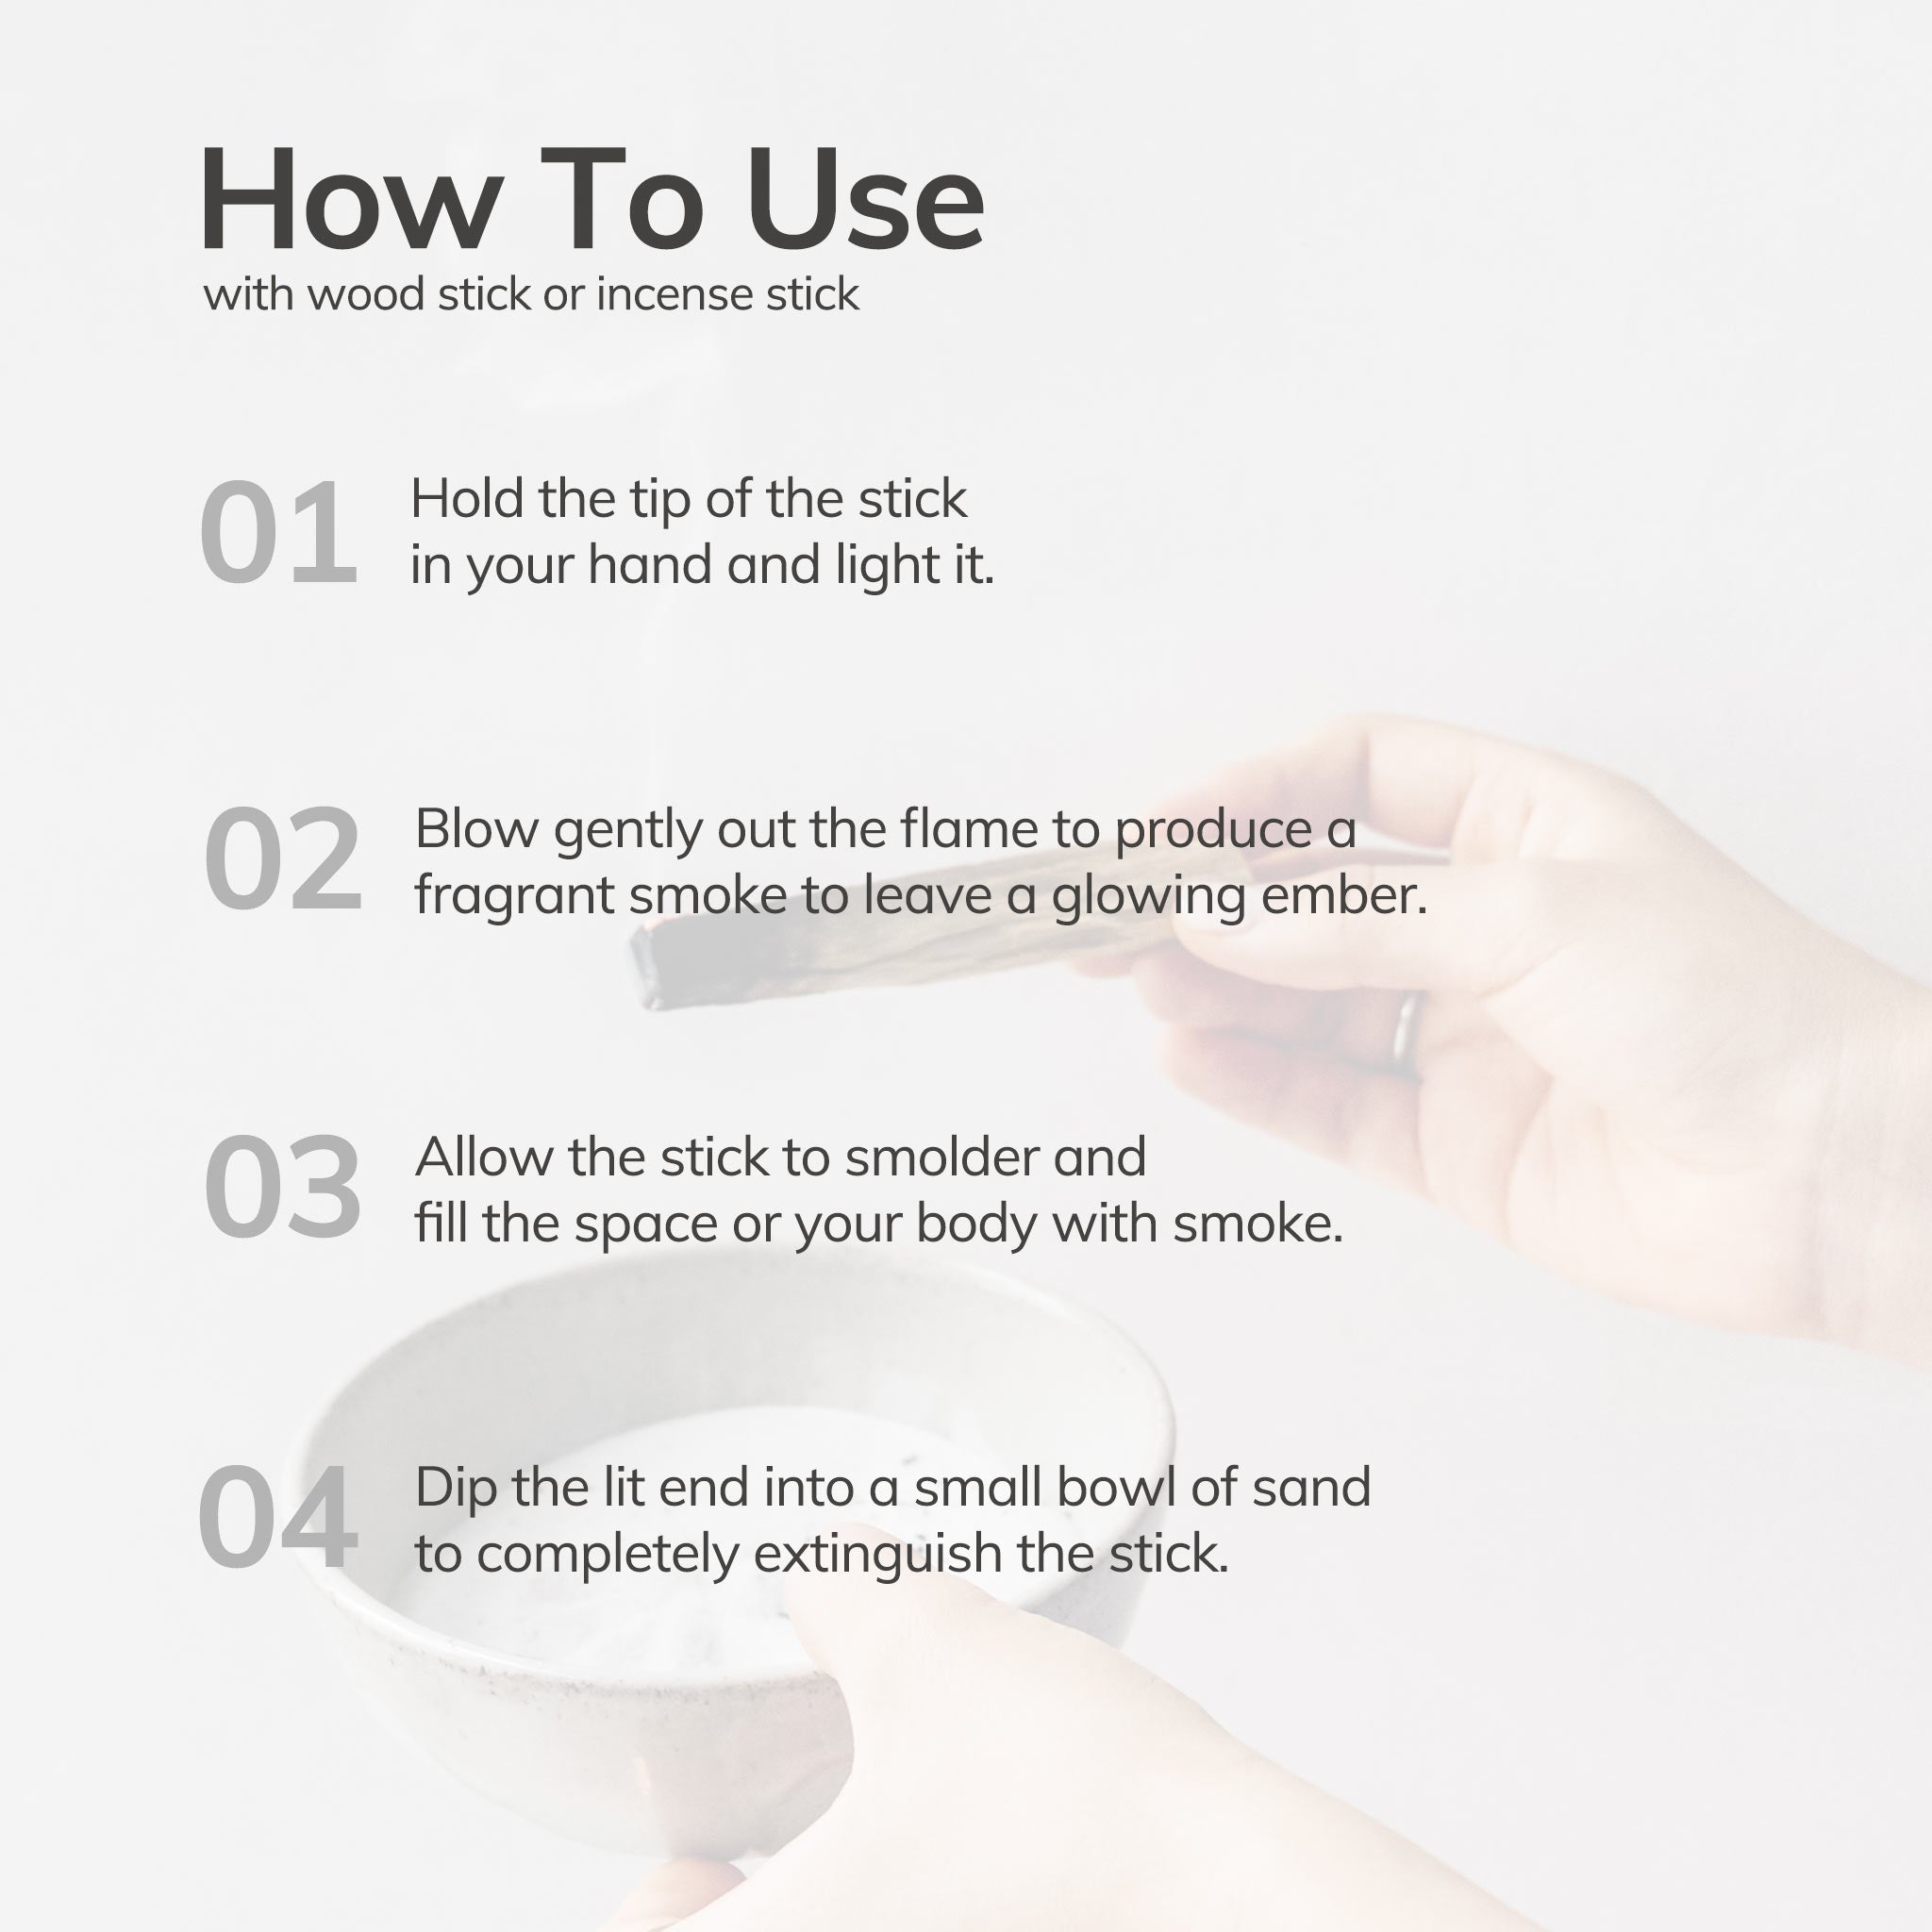 Chronological list of how to use incense cones.